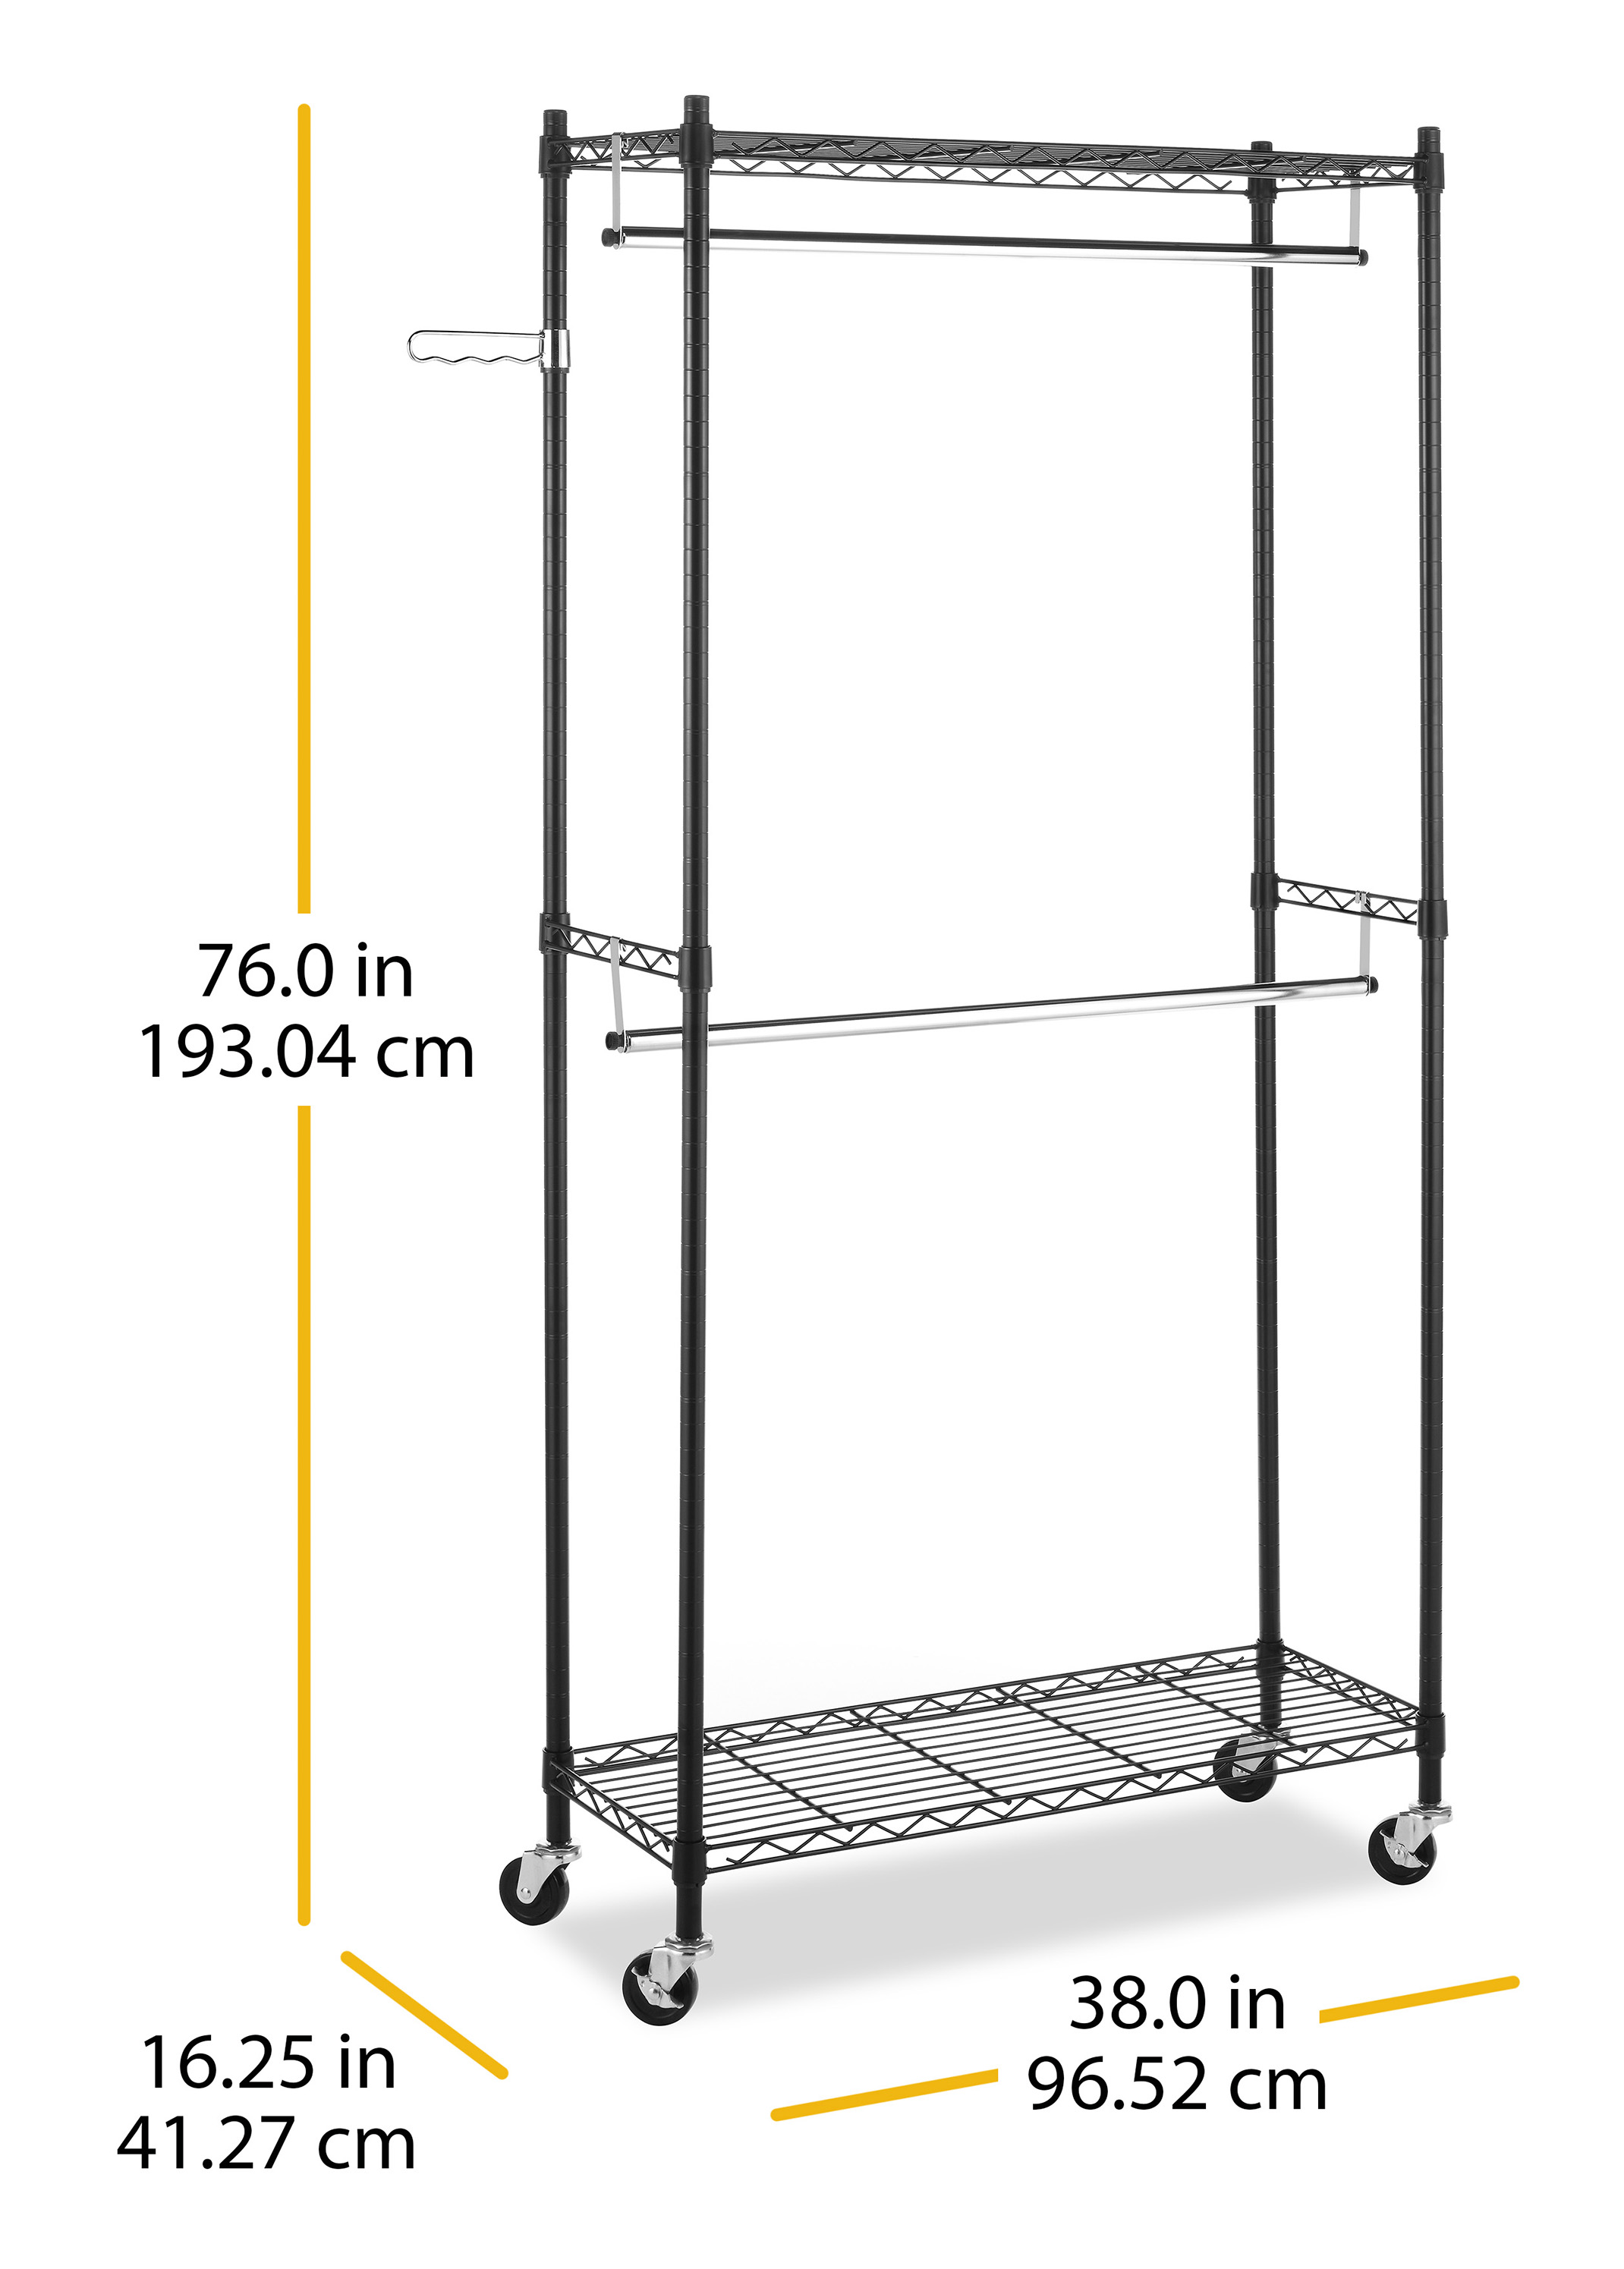 Whitmor Double Rod Rolling Garment Rack, Metal, Black and Chrome - image 2 of 8